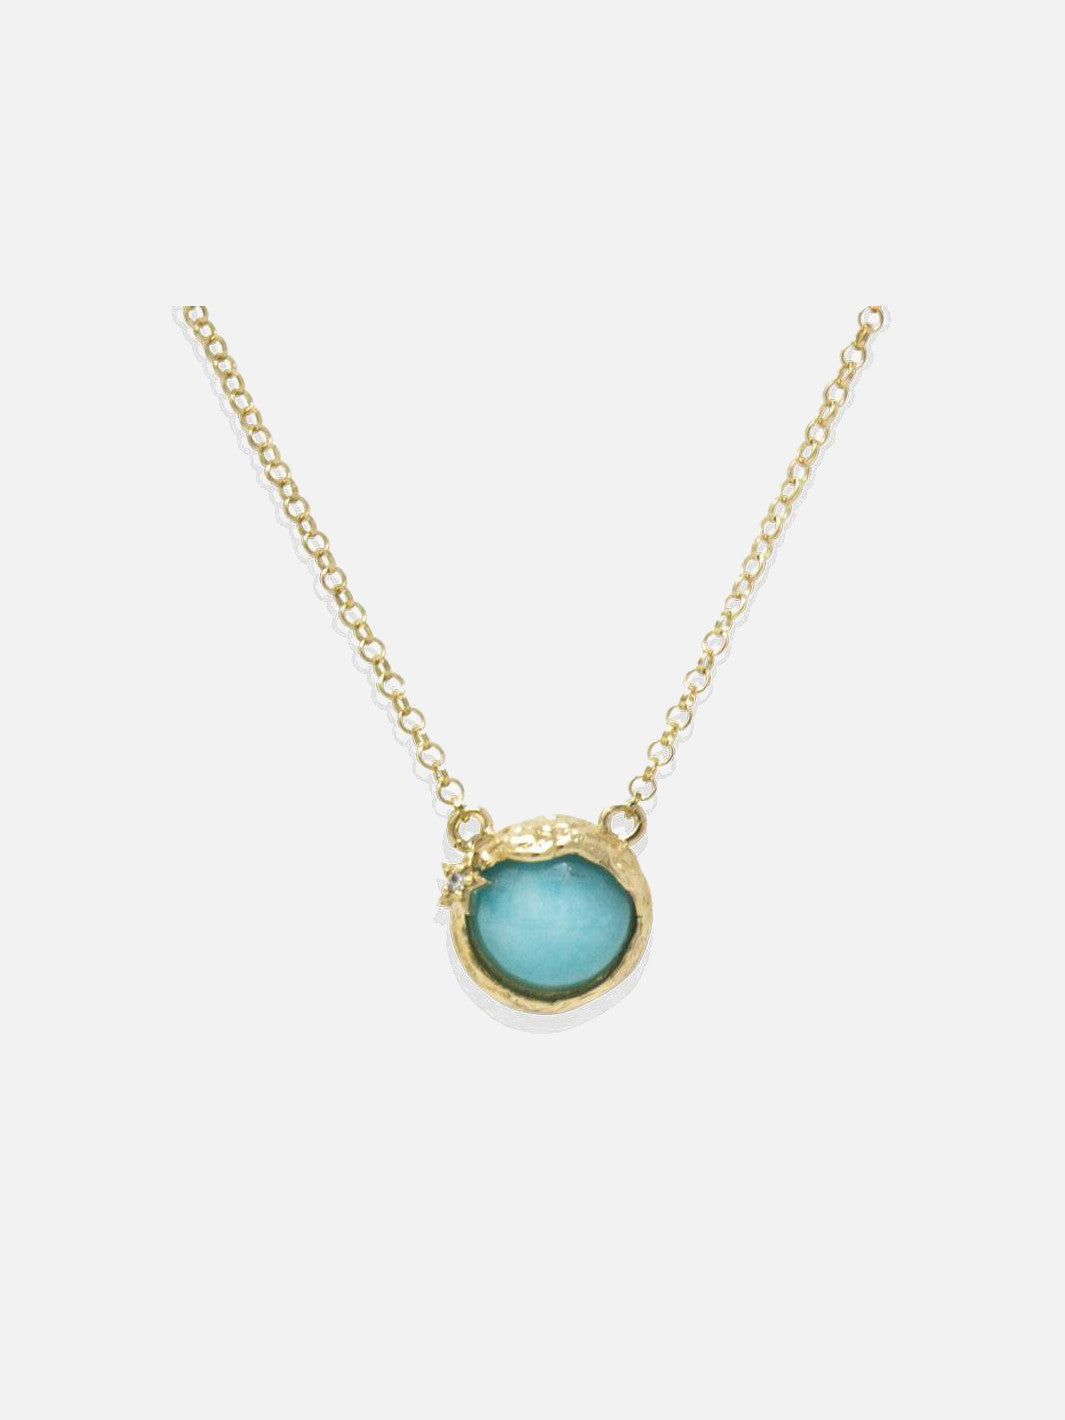 Ad Astra Gold-plated Amazonite Necklace - Image 1